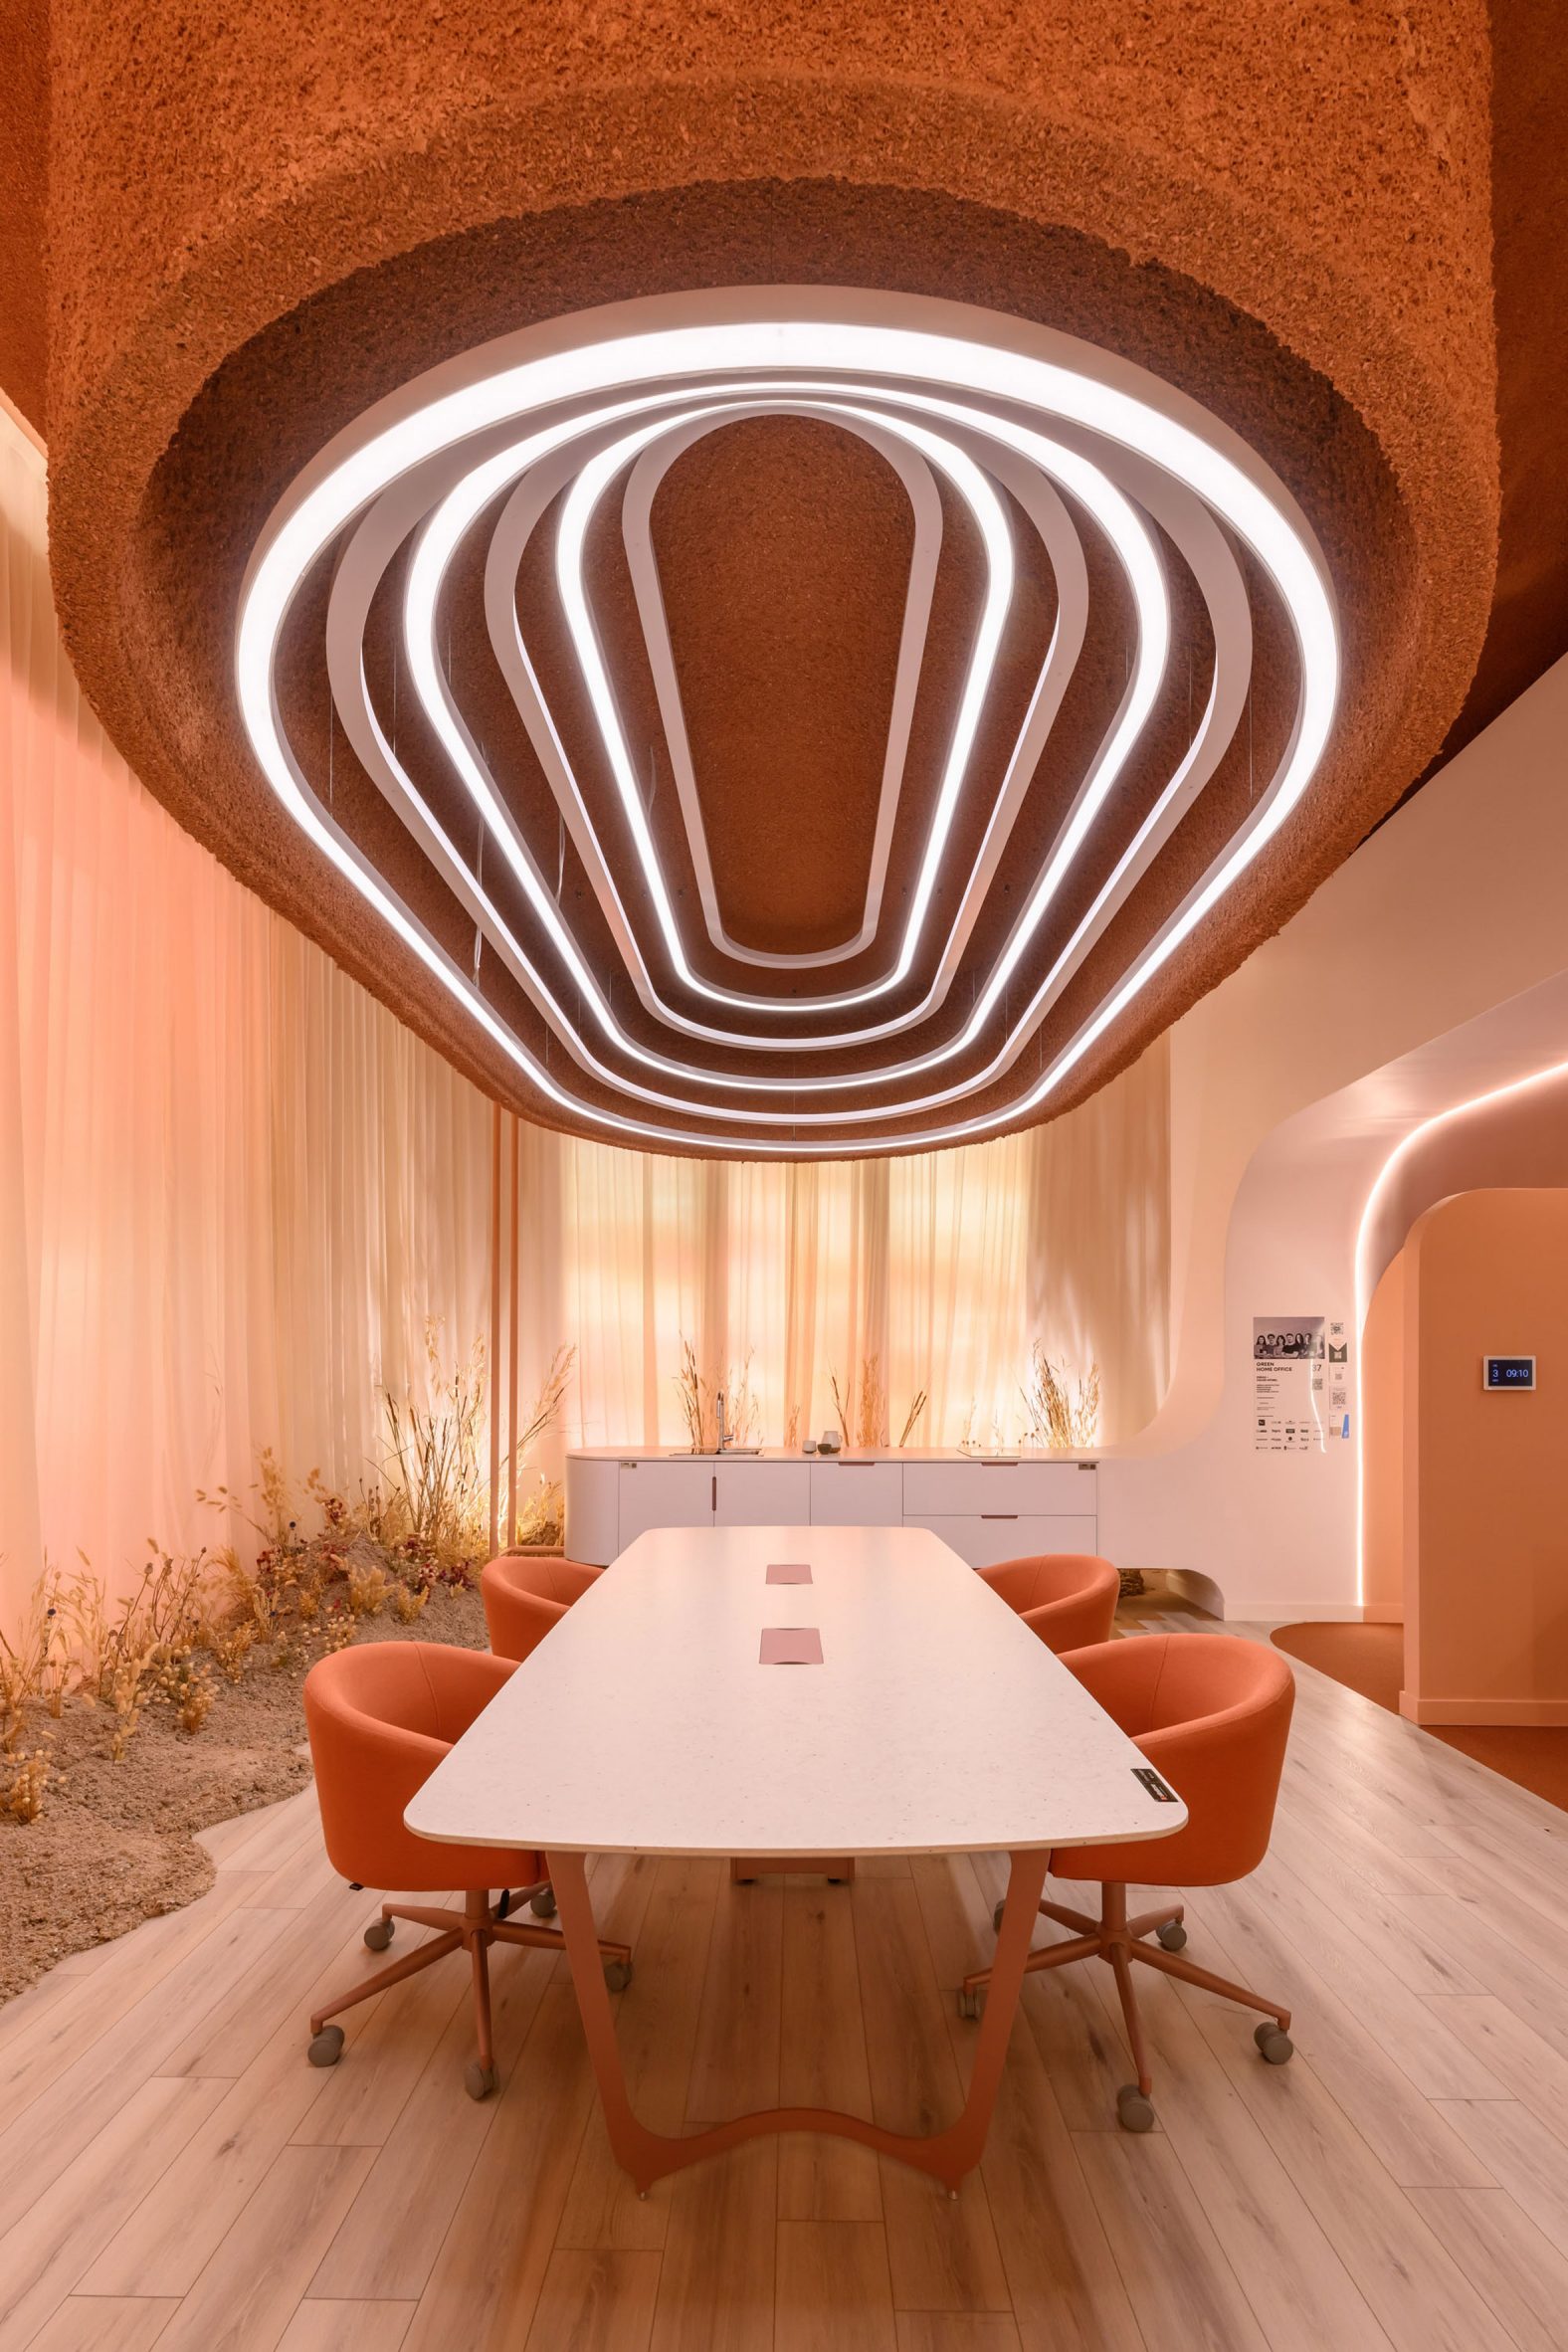 Light fixture with rings of LEDs inside suspended over a dining or meeting table